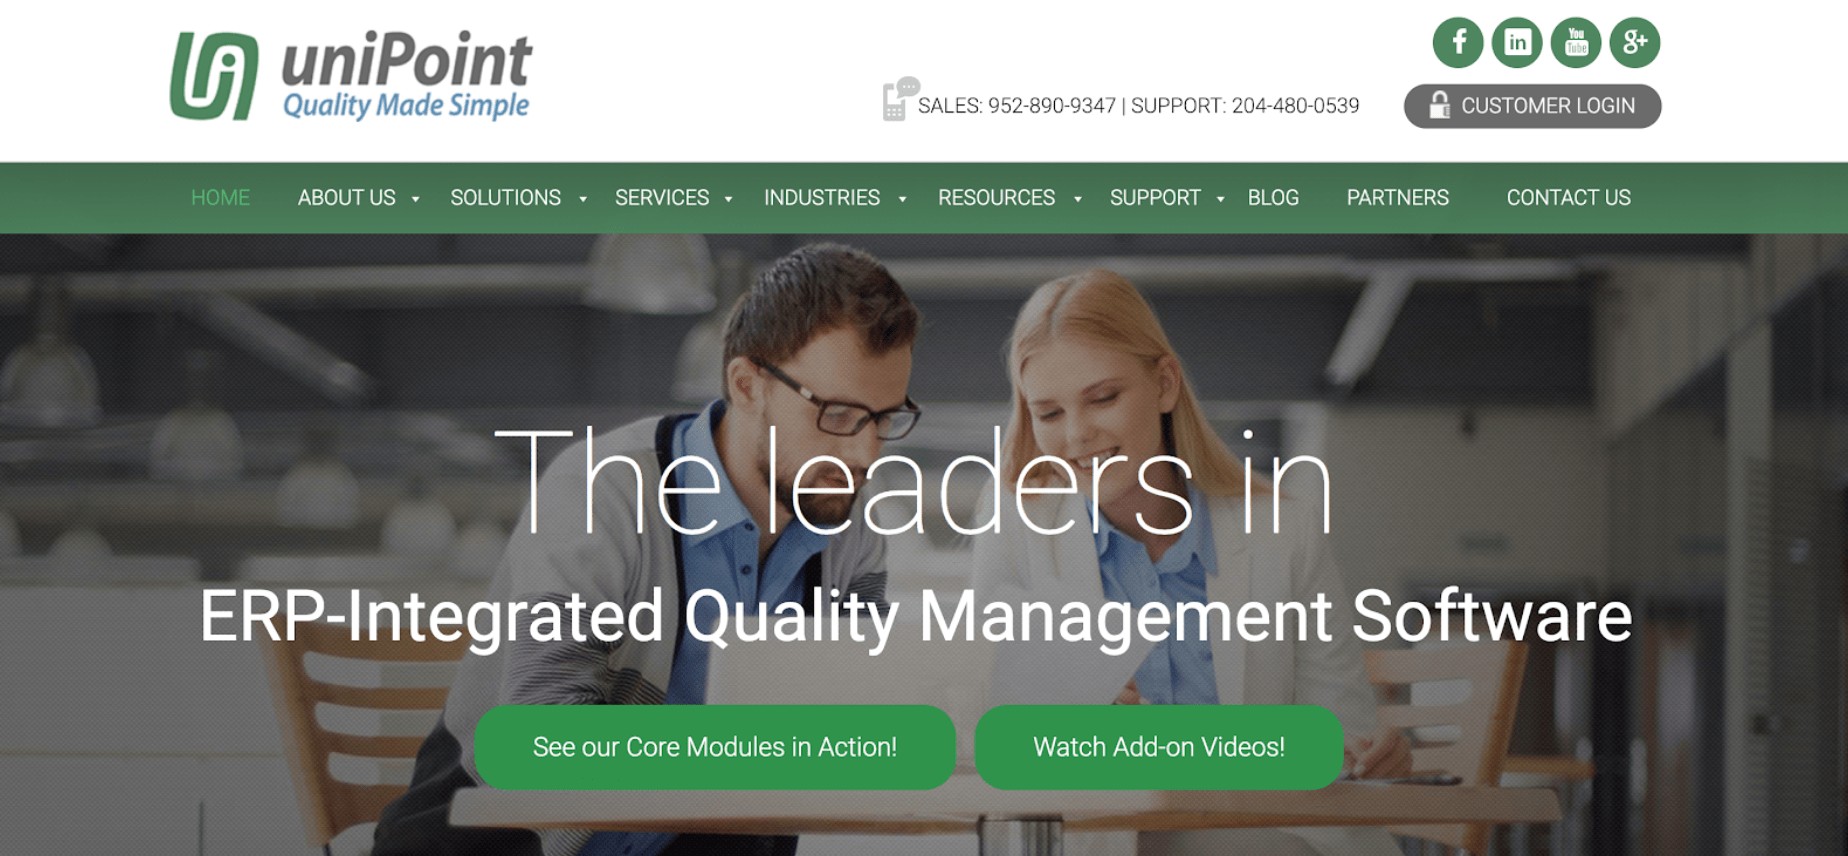 unipoint manufacturing software